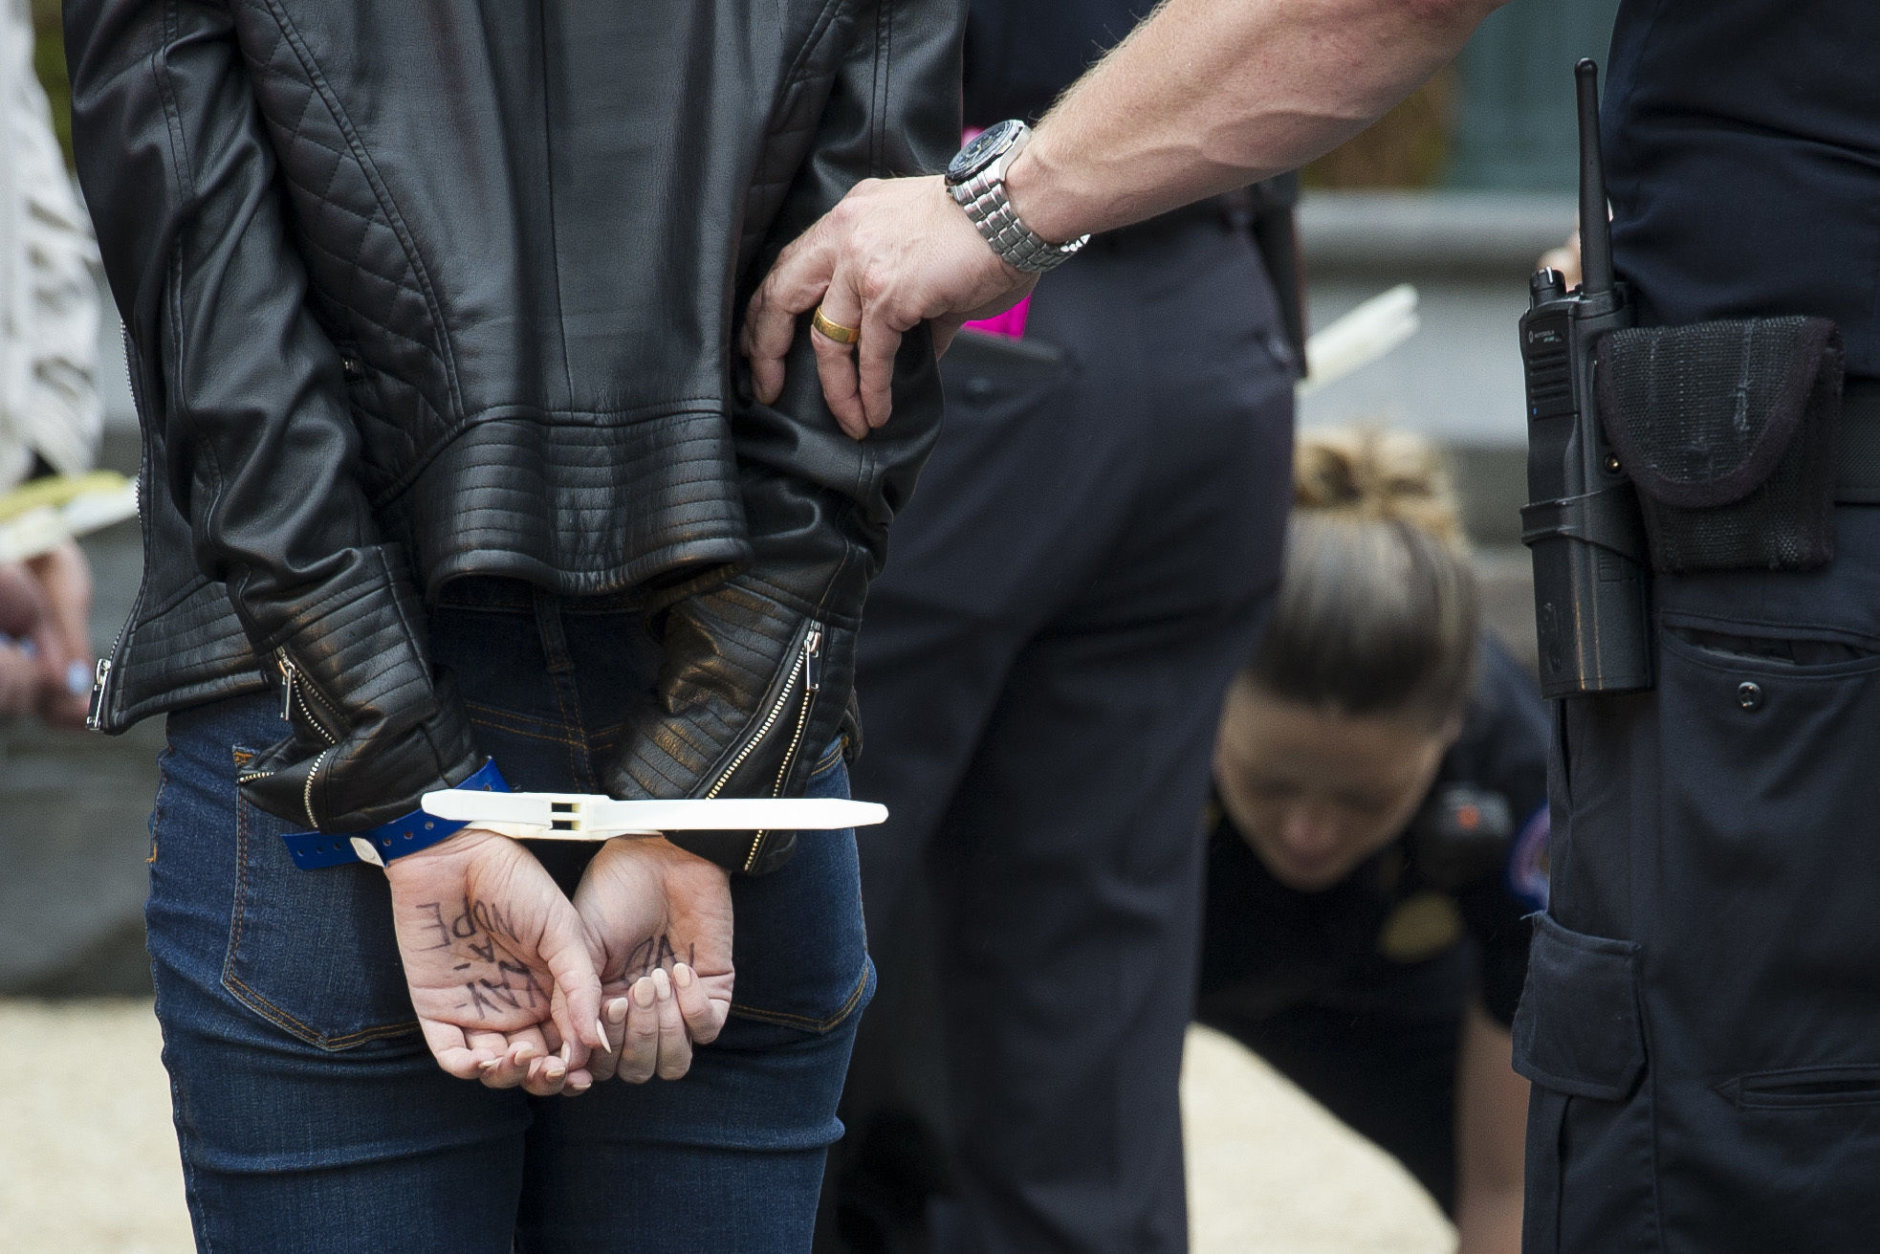 A supporter of Christine Blasey Ford, with "Kav-A-Nope" written on her hand is arrested for blocking traffic on the street between the Supreme Court and Capitol in Washington, Thursday, Sept. 27, 2018. T (AP Photo/Cliff Owen)